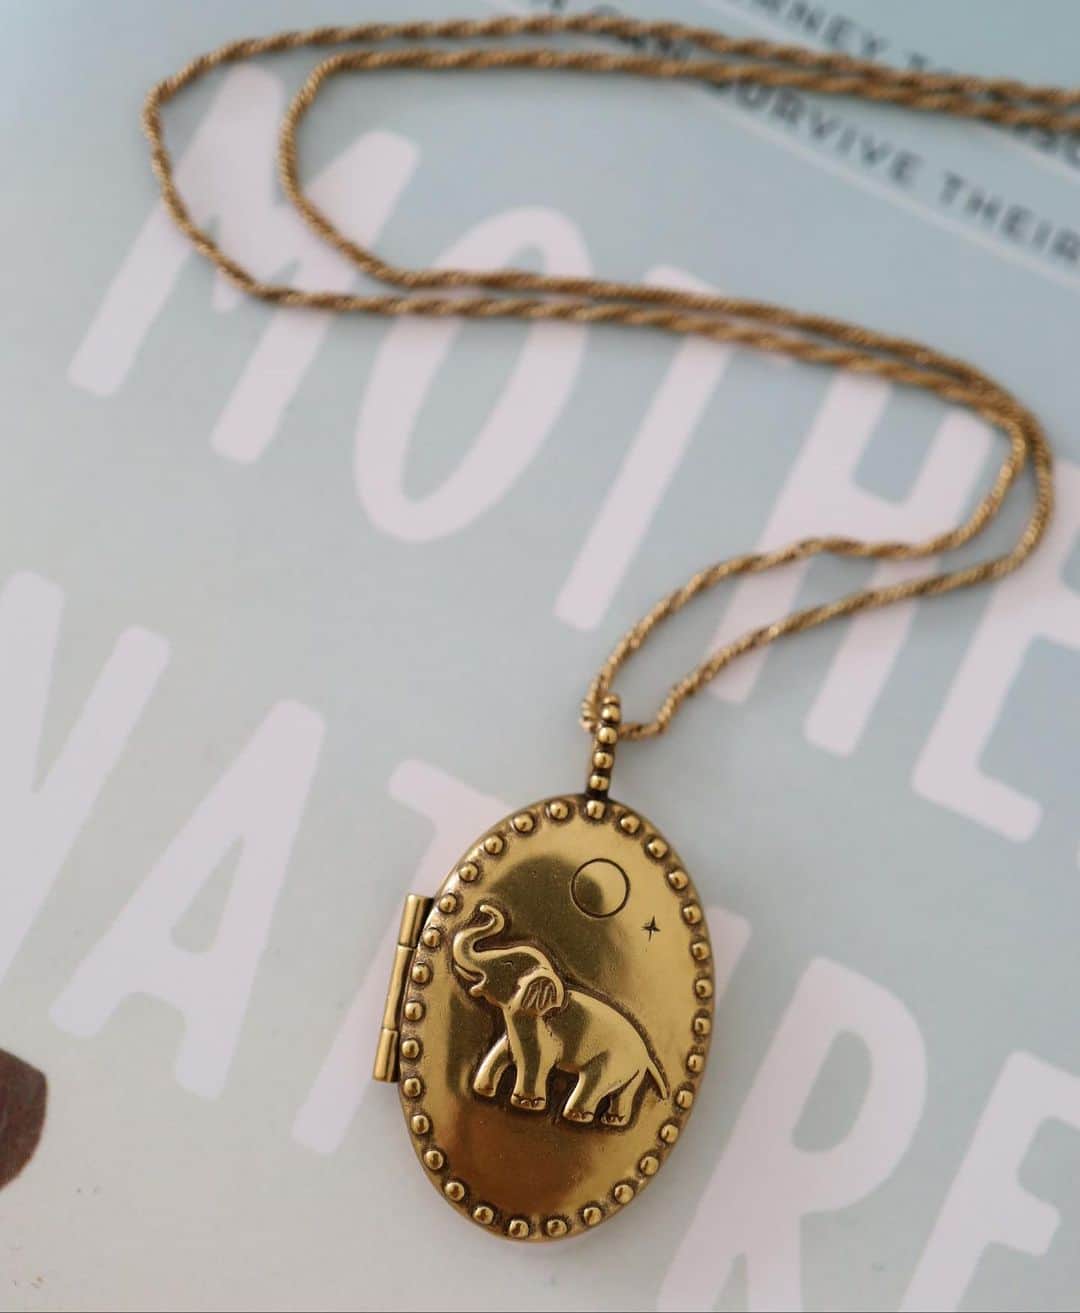 ウィンターケイトのインスタグラム：「Author @jedidiahjenkins and @nicolerichie collaborated to design this limited edition Elephant Locket in celebration of his new book, 'Mother, Nature,' launching this month.  This locket holds special meaning that speaks back to Jedidiah's book:   Every parent/child relationship comes with complexity. We grow up and believe different things. We change and evolve and conversations can be hard. But I hope that we can commit to loving each other, supporting each other, no matter what.   I’m reminded of the ‘Parable of the Elephant.’ It goes like this:    A long time ago, a strange beast was brought to a monastery of blind monks.  It was called an elephant. They had never heard of such a thing,  So they gathered around to touch it. The men each stood in one spot and reached out to touch the creature.  One man touched its trunk. Another, its tusk. Another, its flapping ear.  Each man touched it from where he stood.  When the elephant was gone, the men gathered together to reflect on the wonderful experience. But their stories did not align. One man described a giant snake. Another a gentle monster made of bone. Another, a bat-winged giant. They became angry with each other. How could they lie about something so extraordinary? Soon, they were shouting and fists were swinging.  In many versions of the story, the men go their separate ways and never speak again.      ~~~  This locket represents a commitment to love,  To believing that no matter how different you are,  No matter how certain you are, There is a love that sees it all from above,  That sees the whole elephant, not just a trunk or a tusk.  I put a picture of my mom and me in mine. I wear one and she does too. We don’t agree on much, but we agree that we love each other and always will.   -Jedidiah Jenkins, author of ‘Mother, Nature’ / Designed by Nicole Richie  We hope you’ll get one for the family member or friend that can commit with you to loving no matter what. ♥️🐘✨」